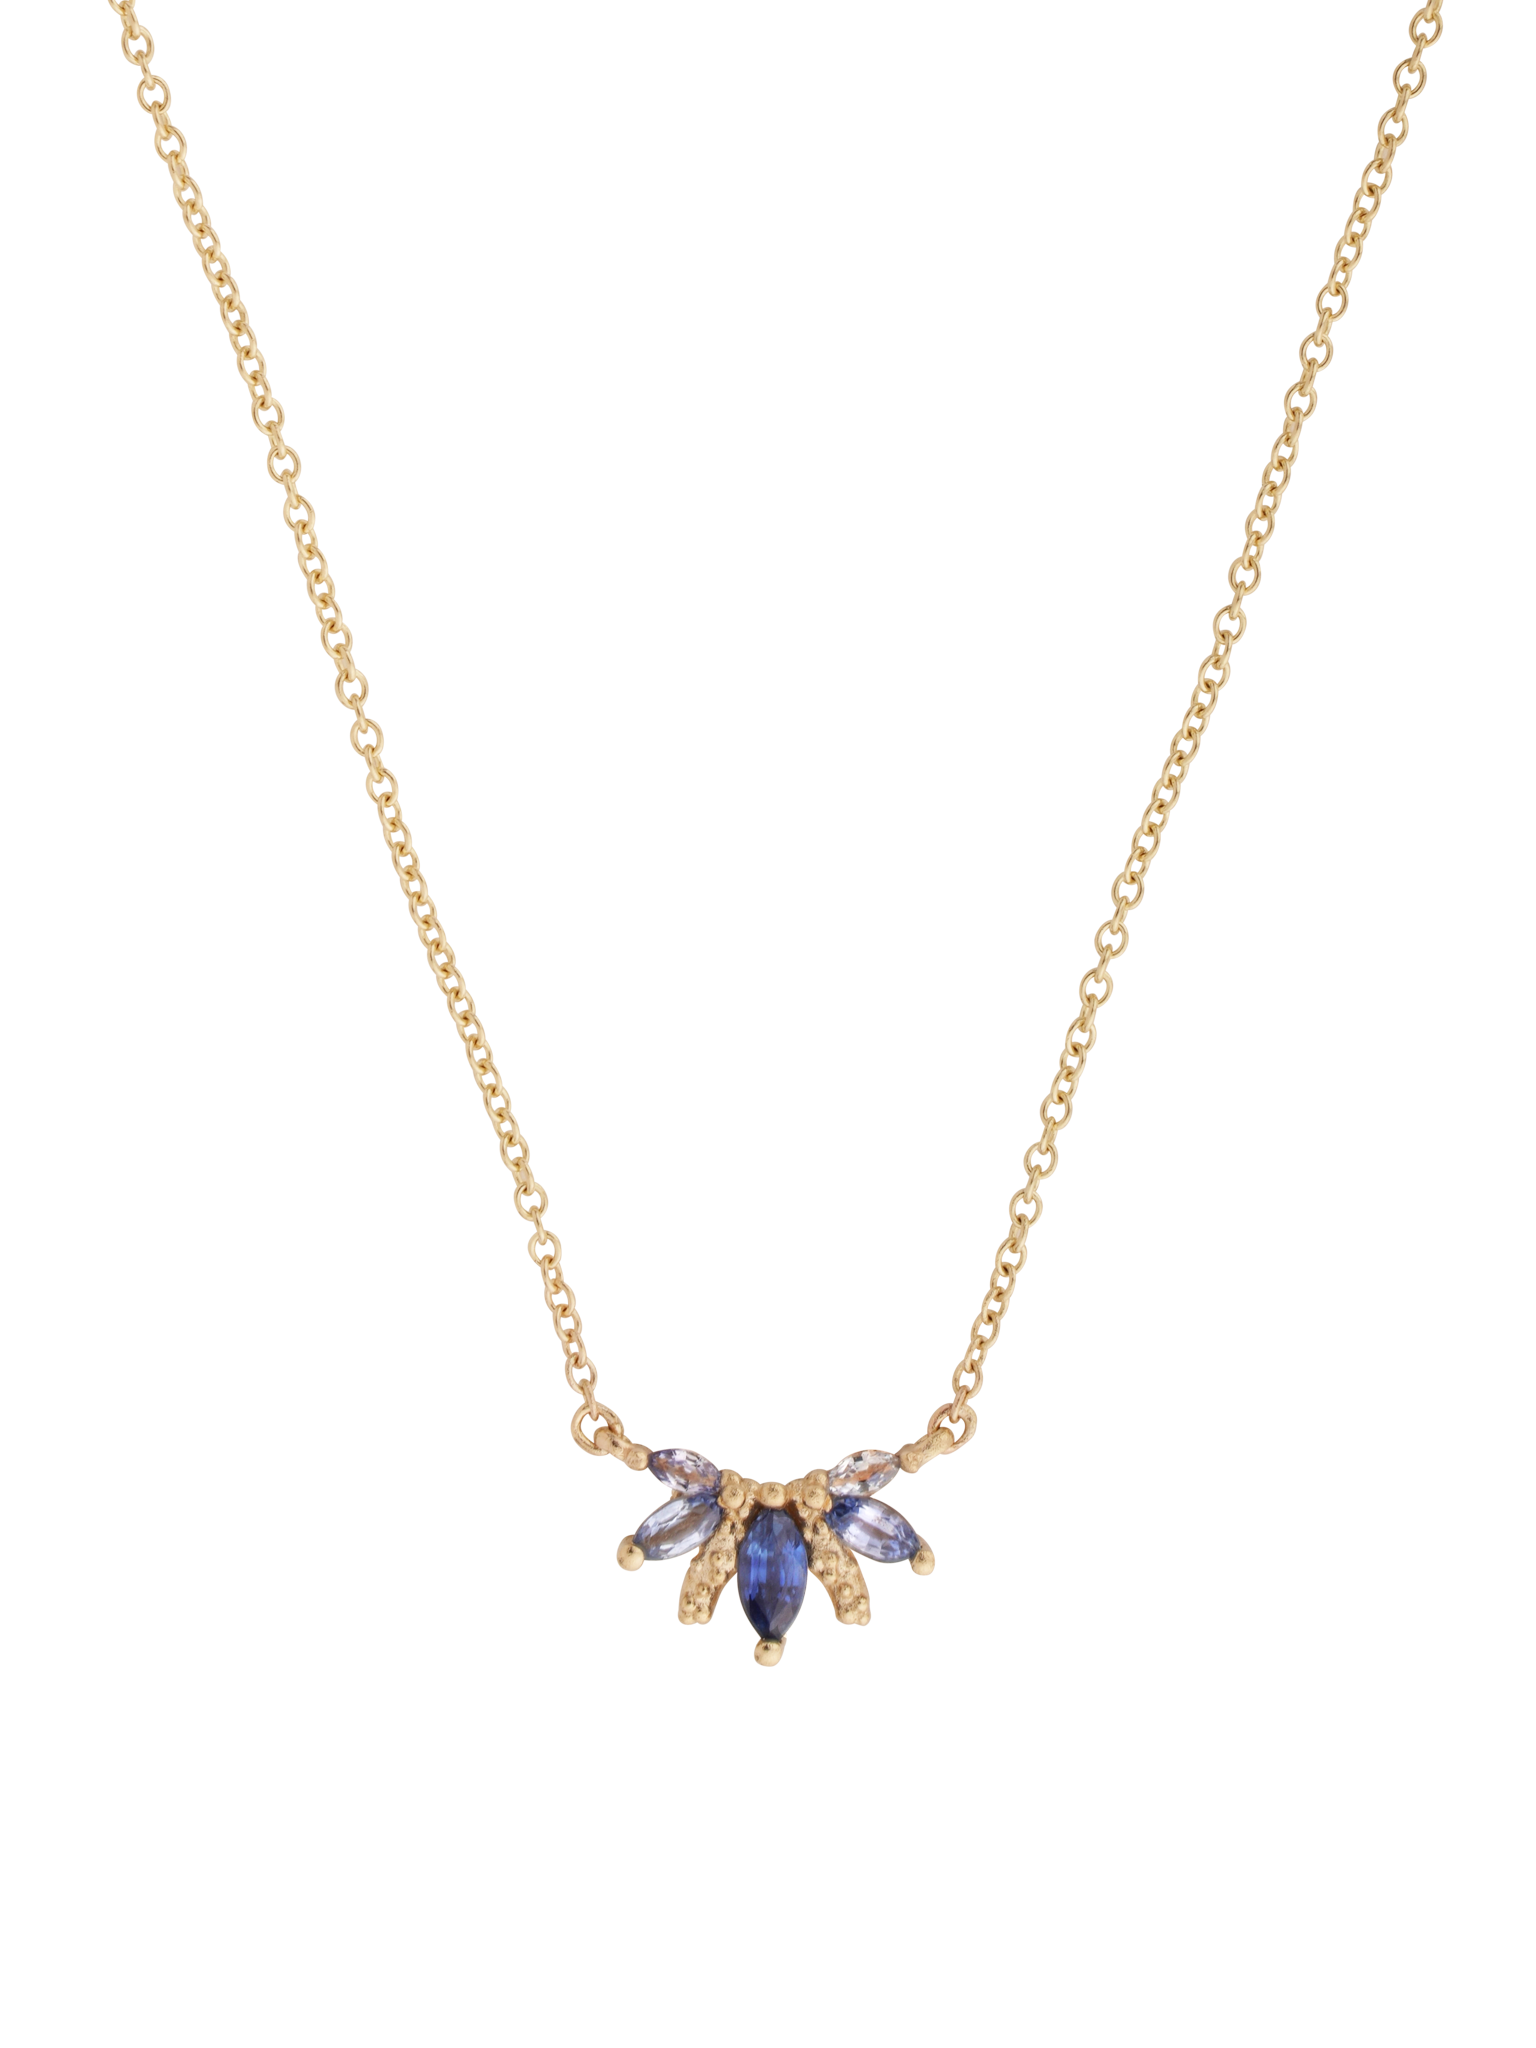 Orno marquise flare pendant with blue sapphires